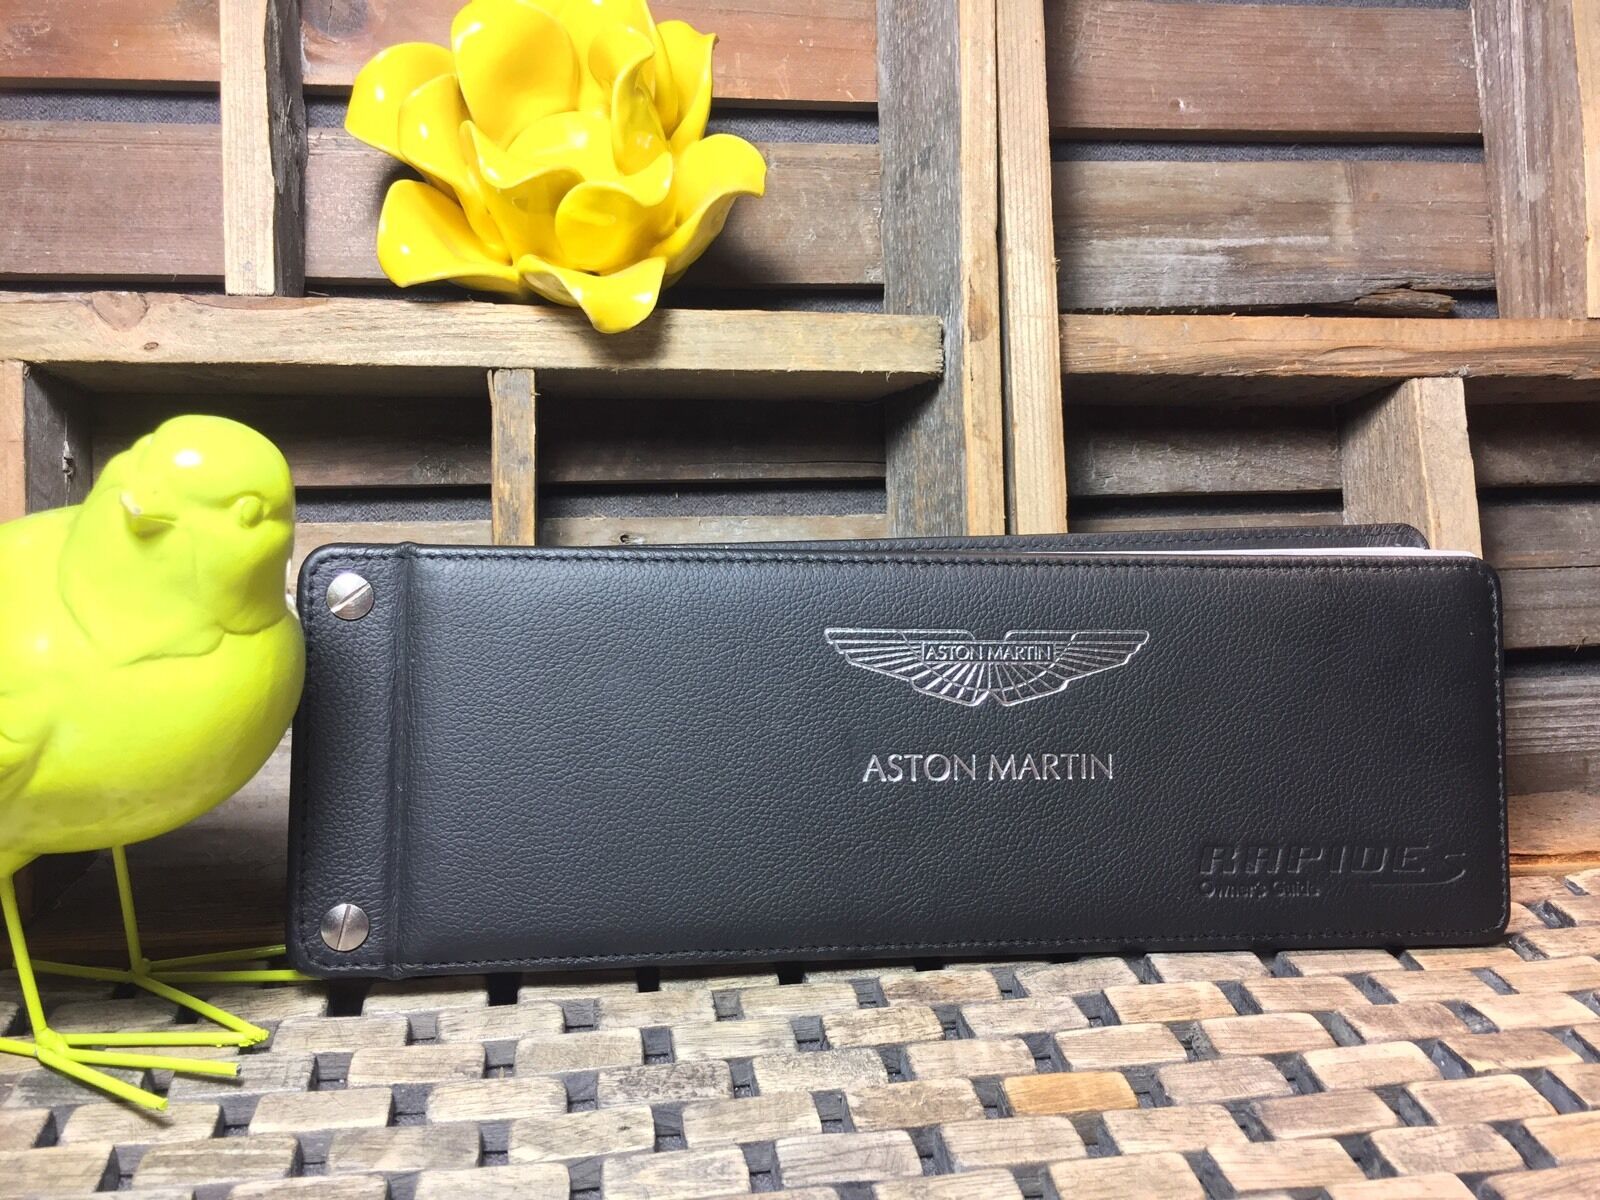 🟧 2014 2015 ASTON MARTIN RAPIDE S OWNERS MANUAL +NAVIGATION info: +SERVICE SECT